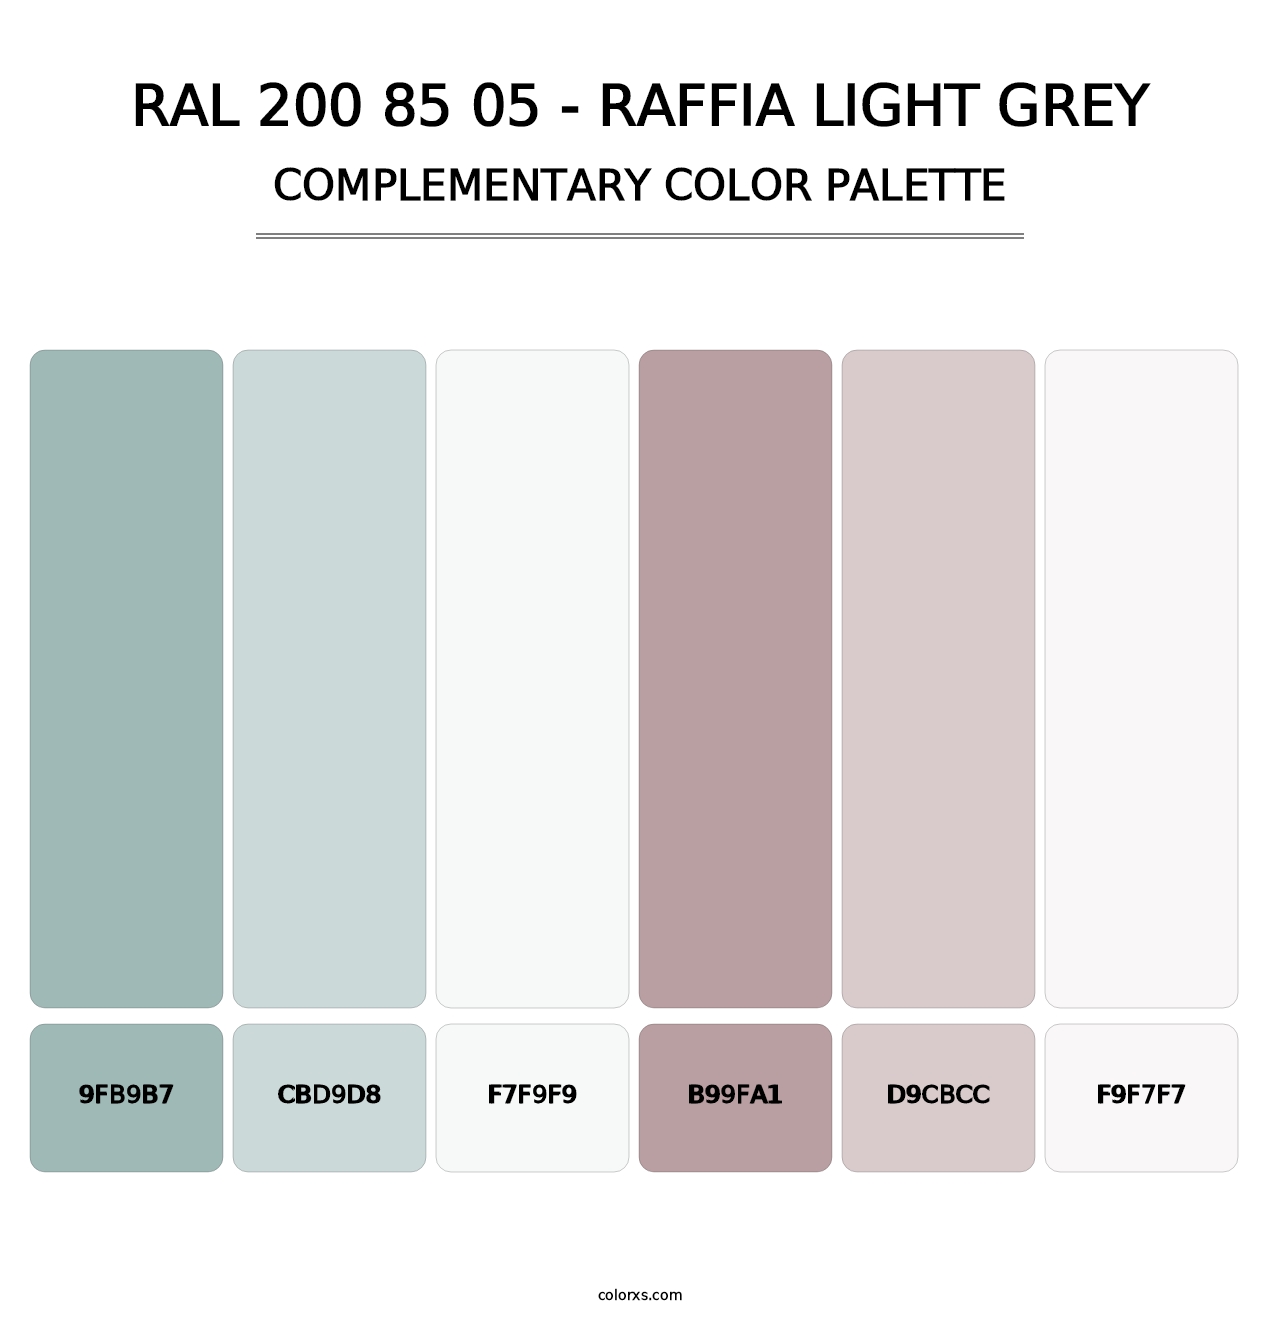 RAL 200 85 05 - Raffia Light Grey - Complementary Color Palette